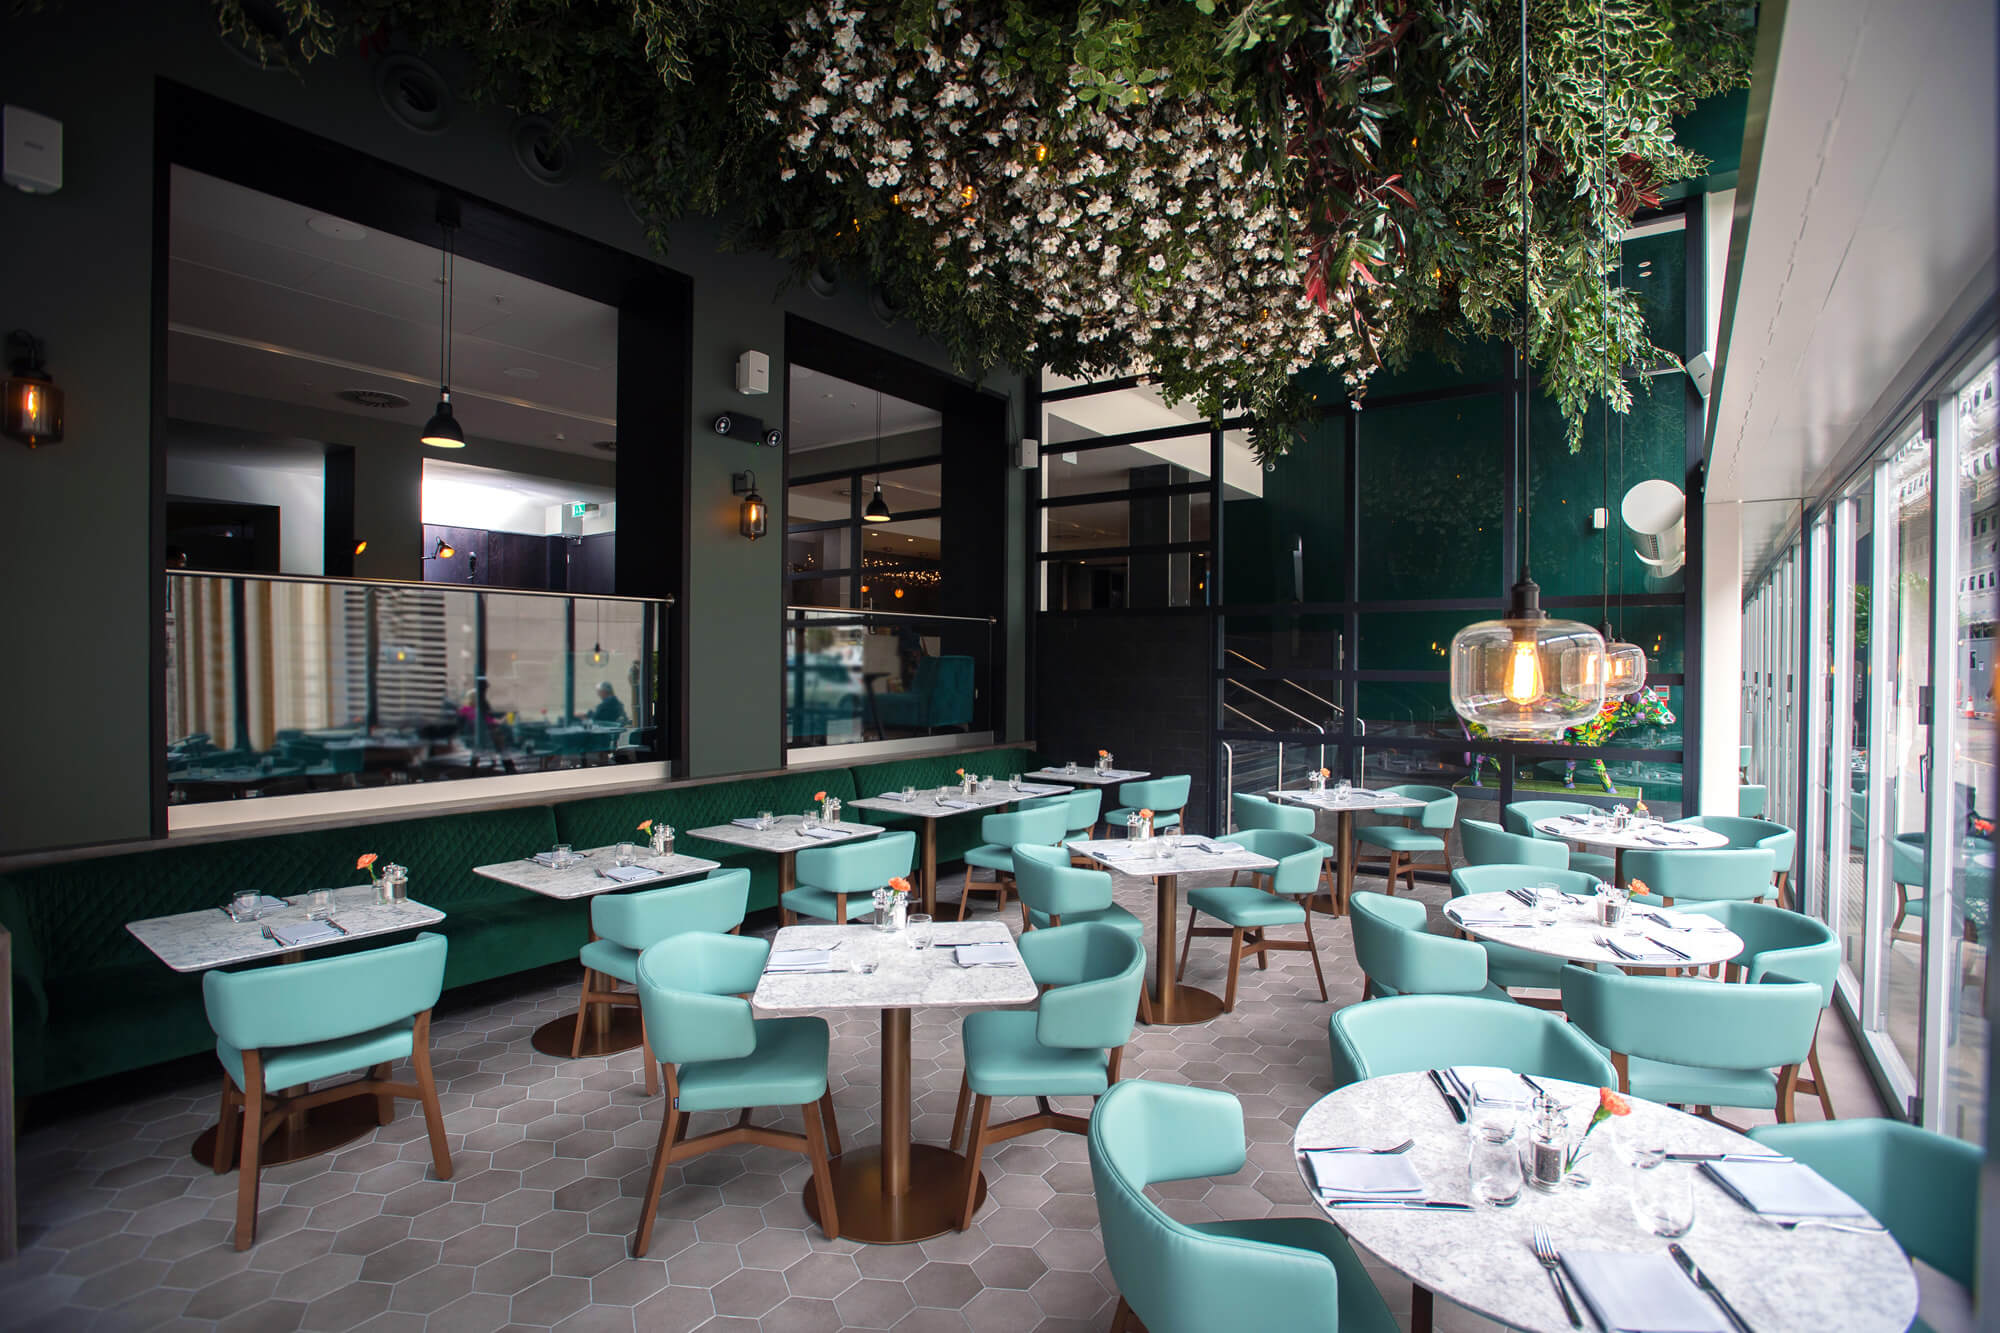 Tables and chairs set up under the floral canopy at The Lampery